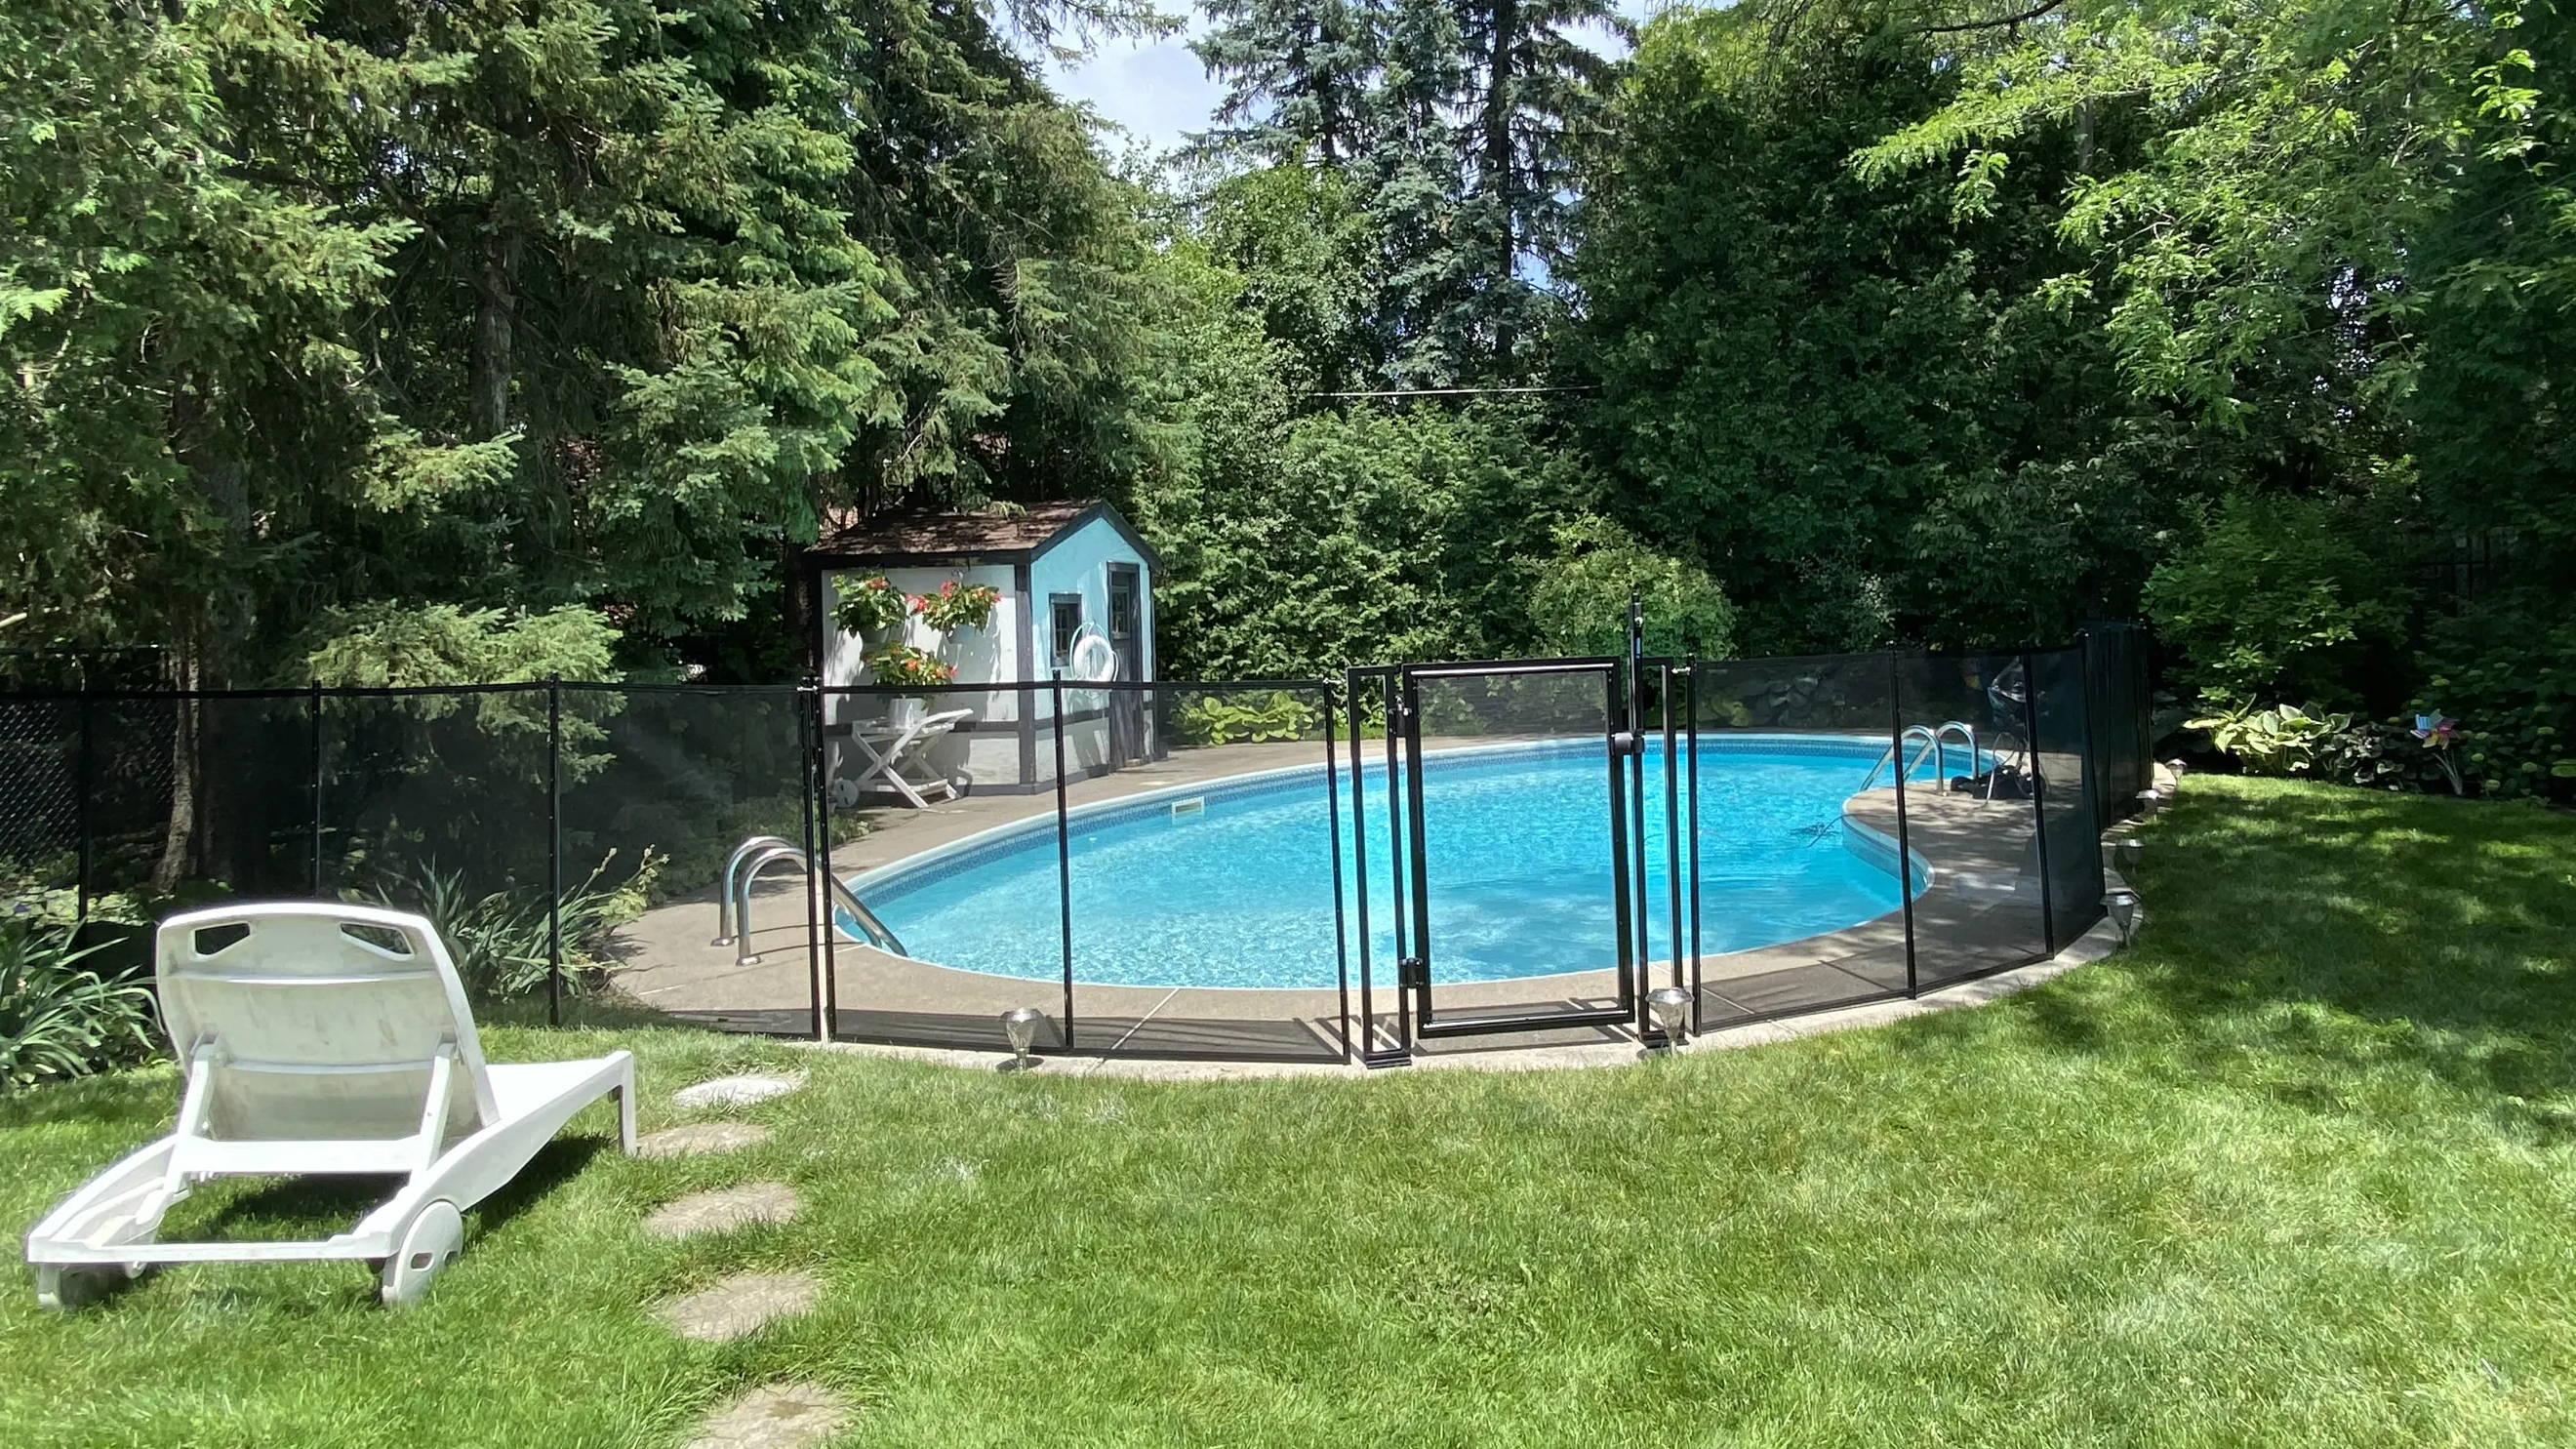 Baby Barrier pool fencing installed around a customers' pool.